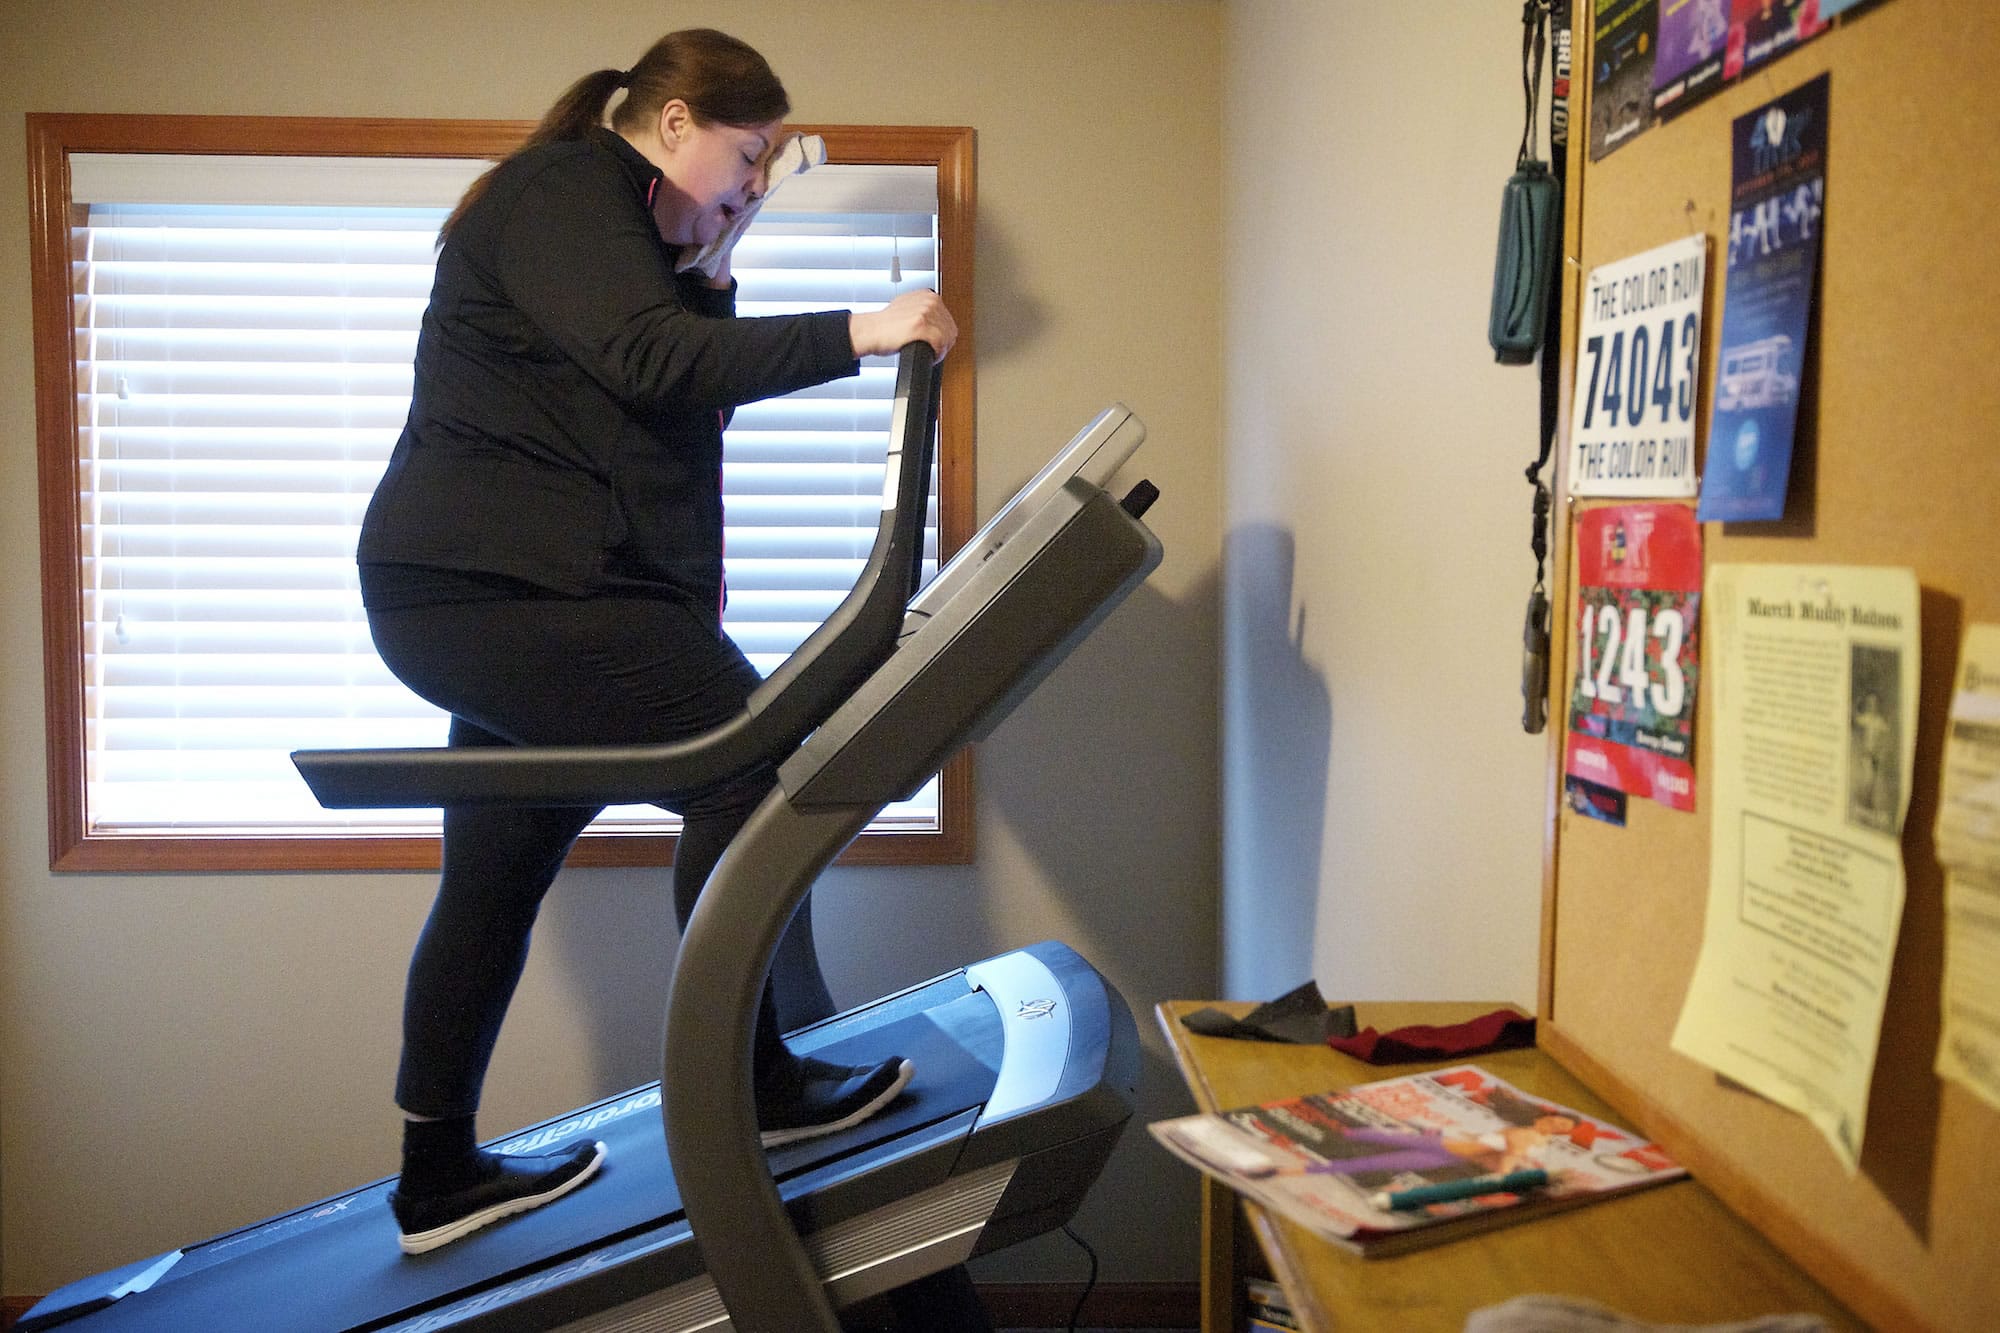 Laina Harris goes through a 20-minute incline workout on her new treadmill in her Camas home Wednesday. Harris uses the steep incline workout and weekend hikes as preparation for an 8-mile hike on Mount St.